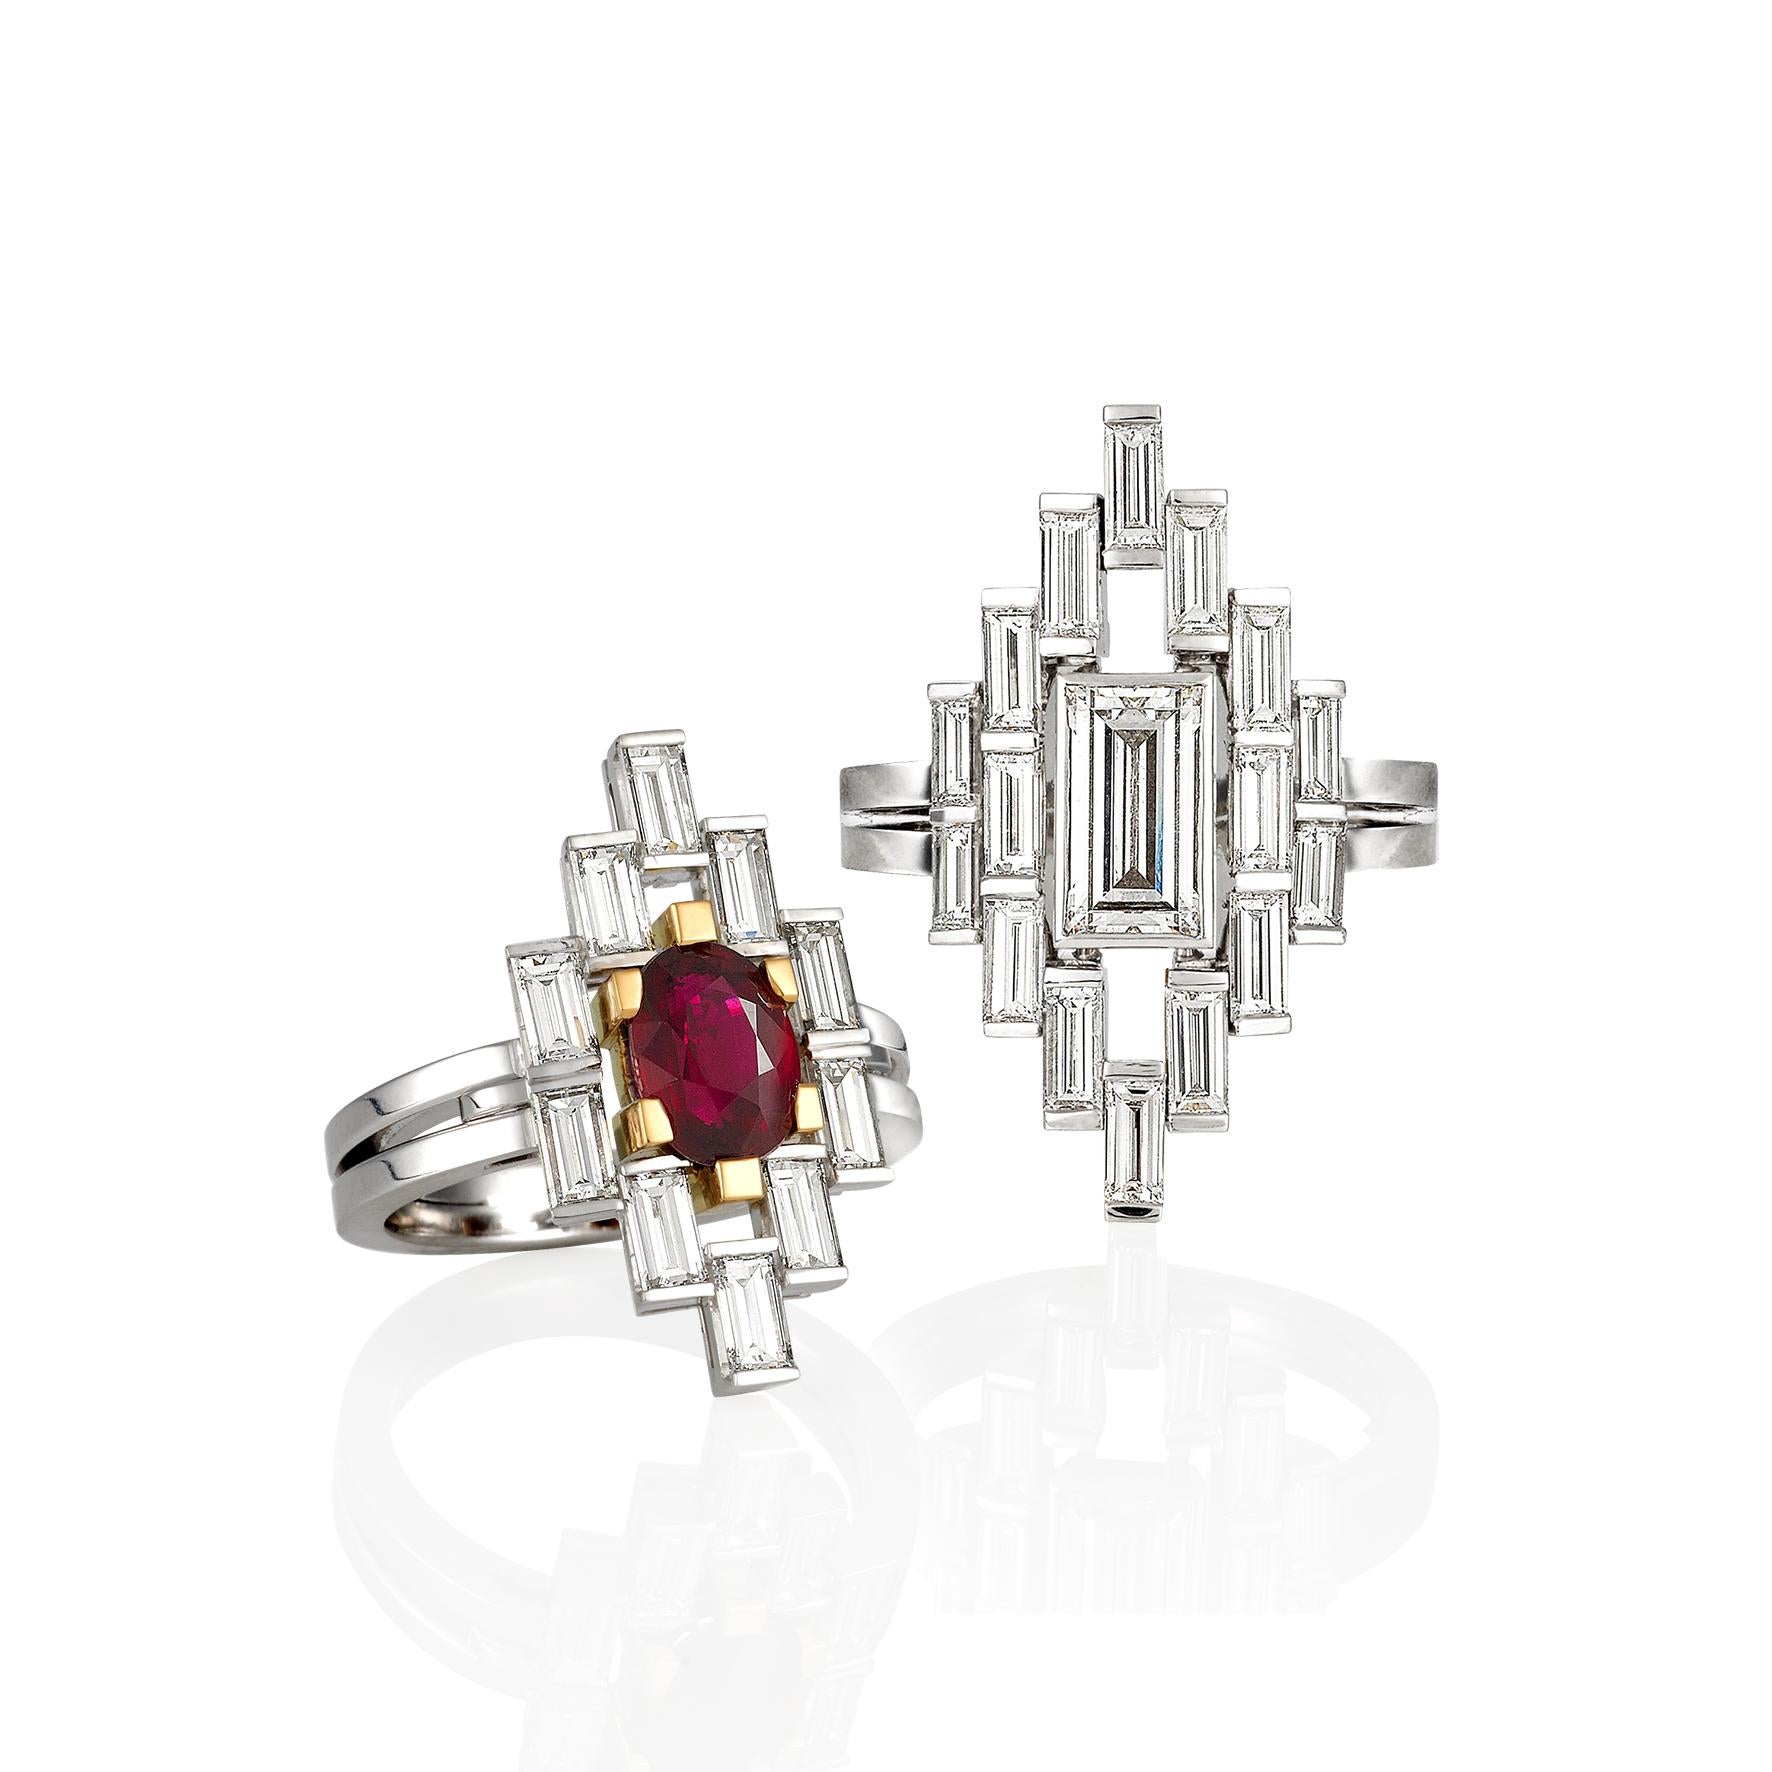 Emerald Cut Certified 1.55 Carat Natural Ruby and Baguette Diamond Art Deco Dress Ring For Sale